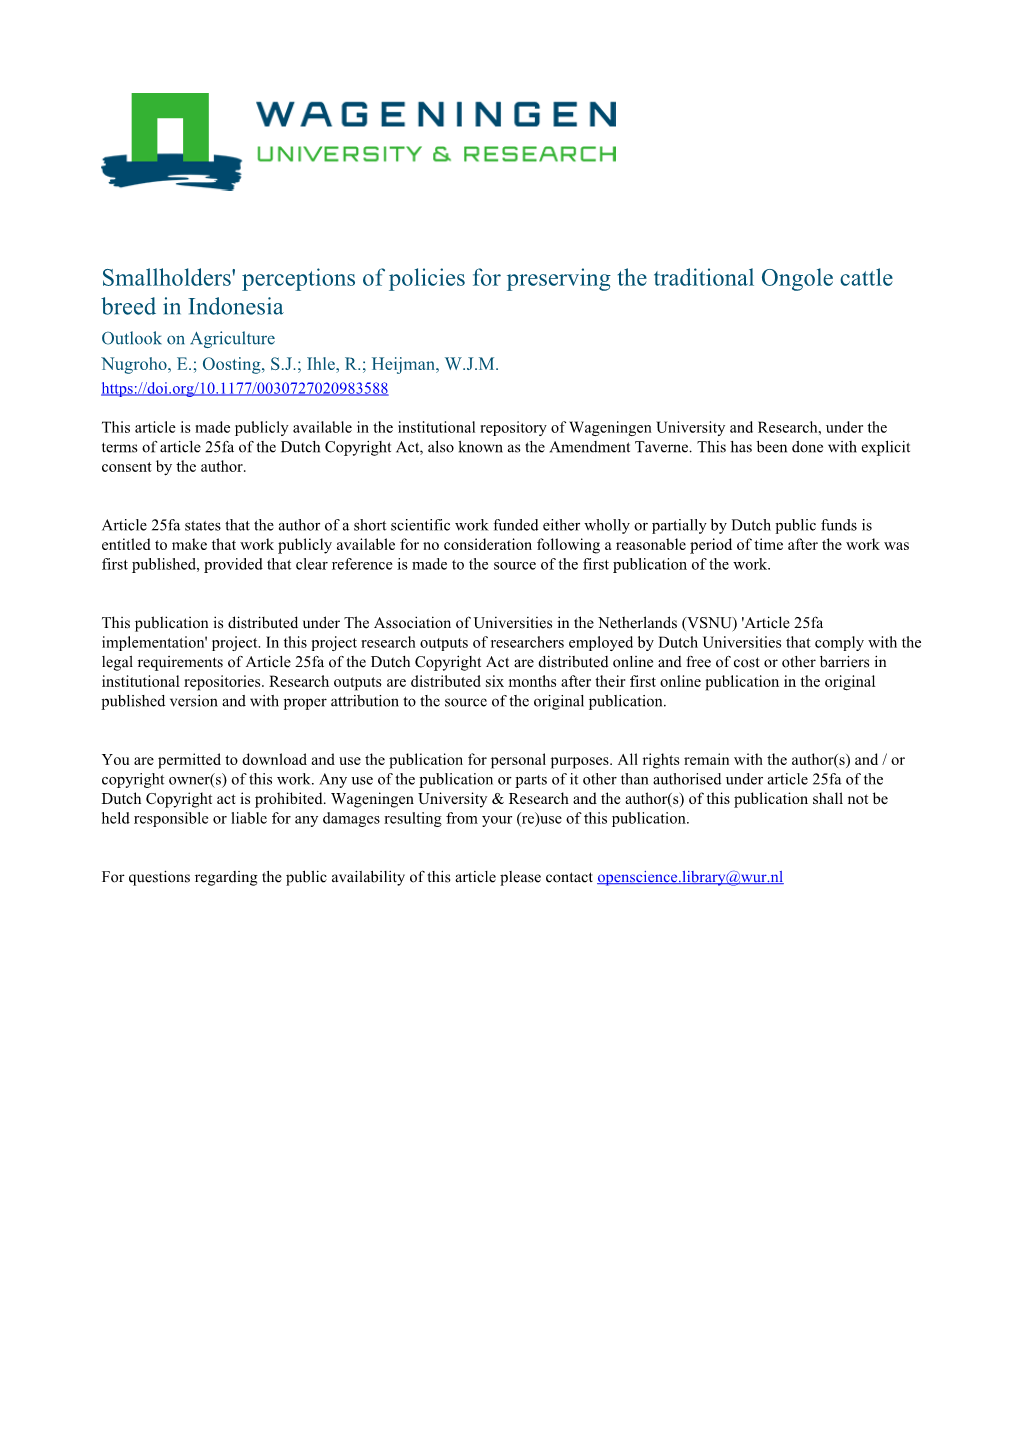 Smallholders' Perceptions of Policies for Preserving the Traditional Ongole